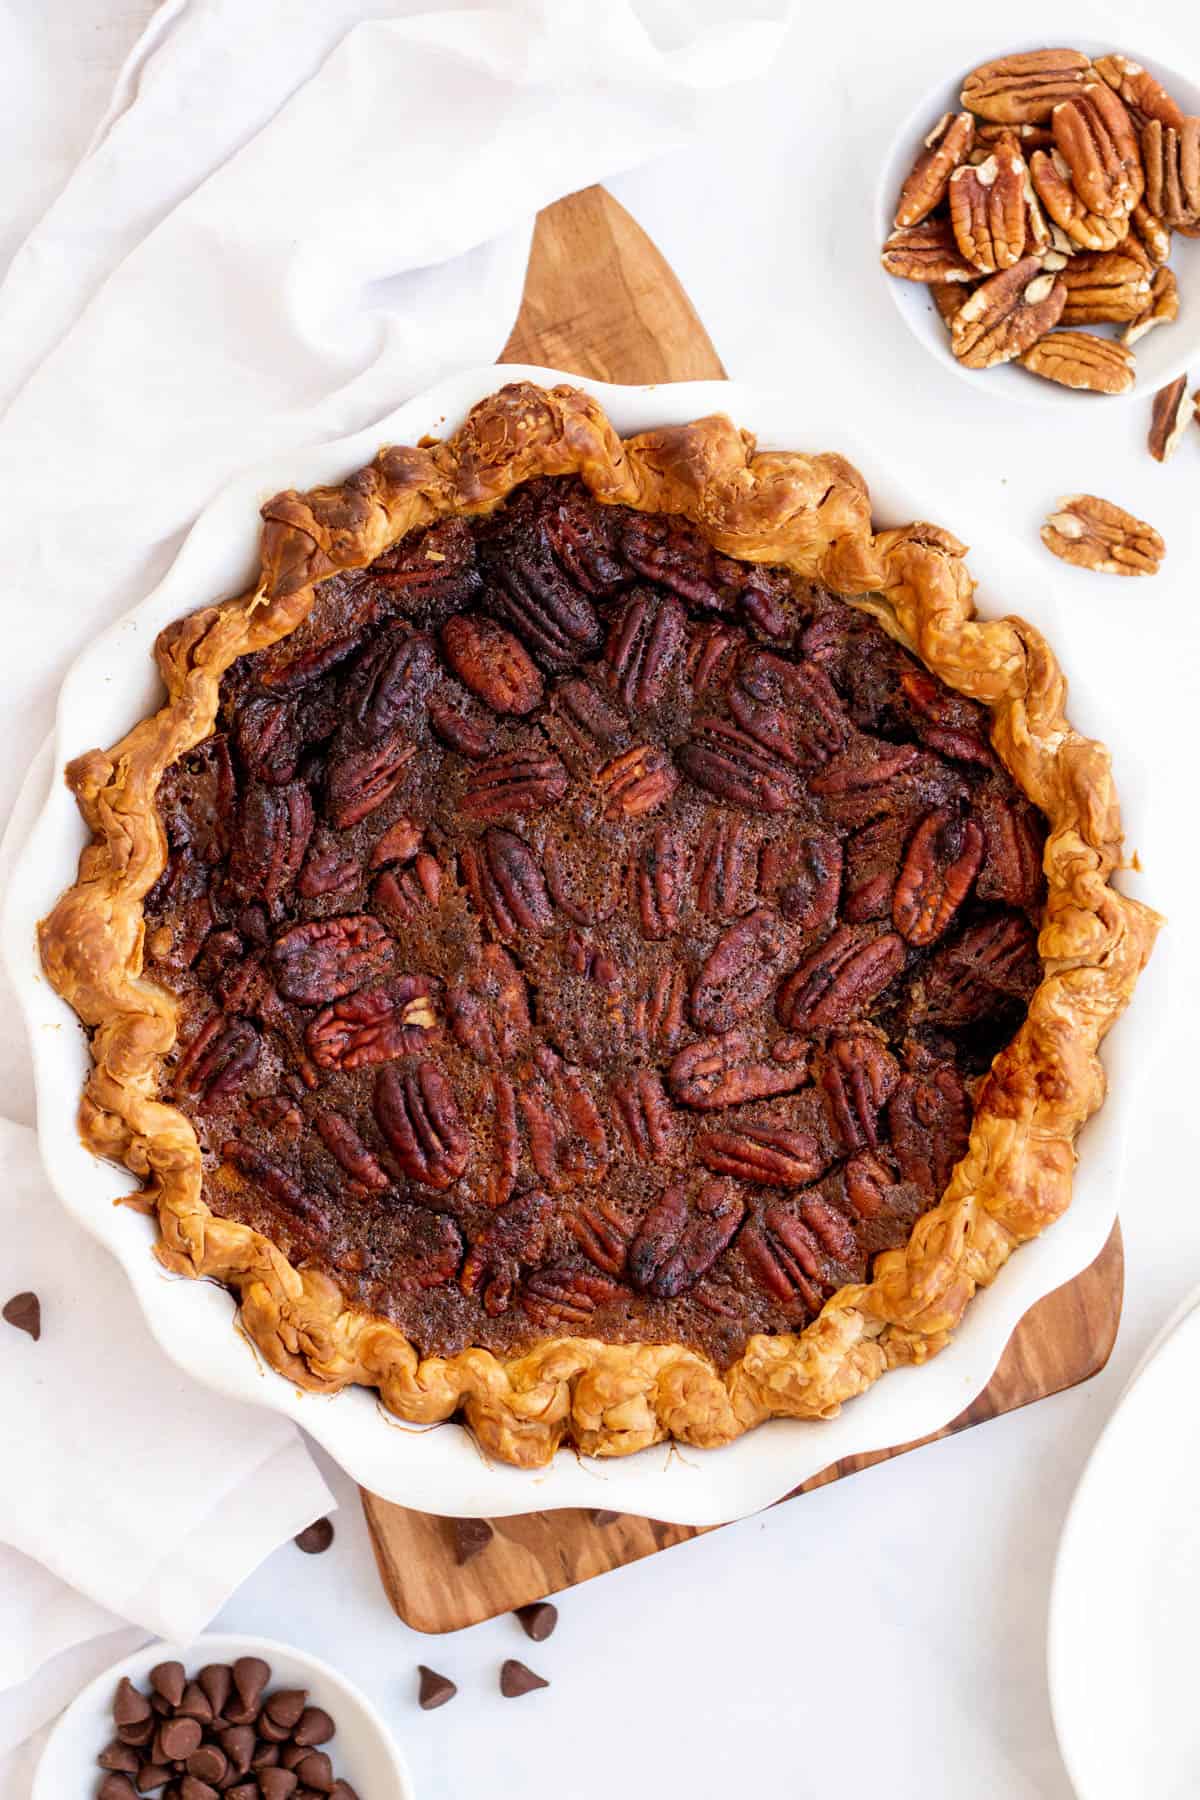 a whole chocolate pecan pie in a white pie dish